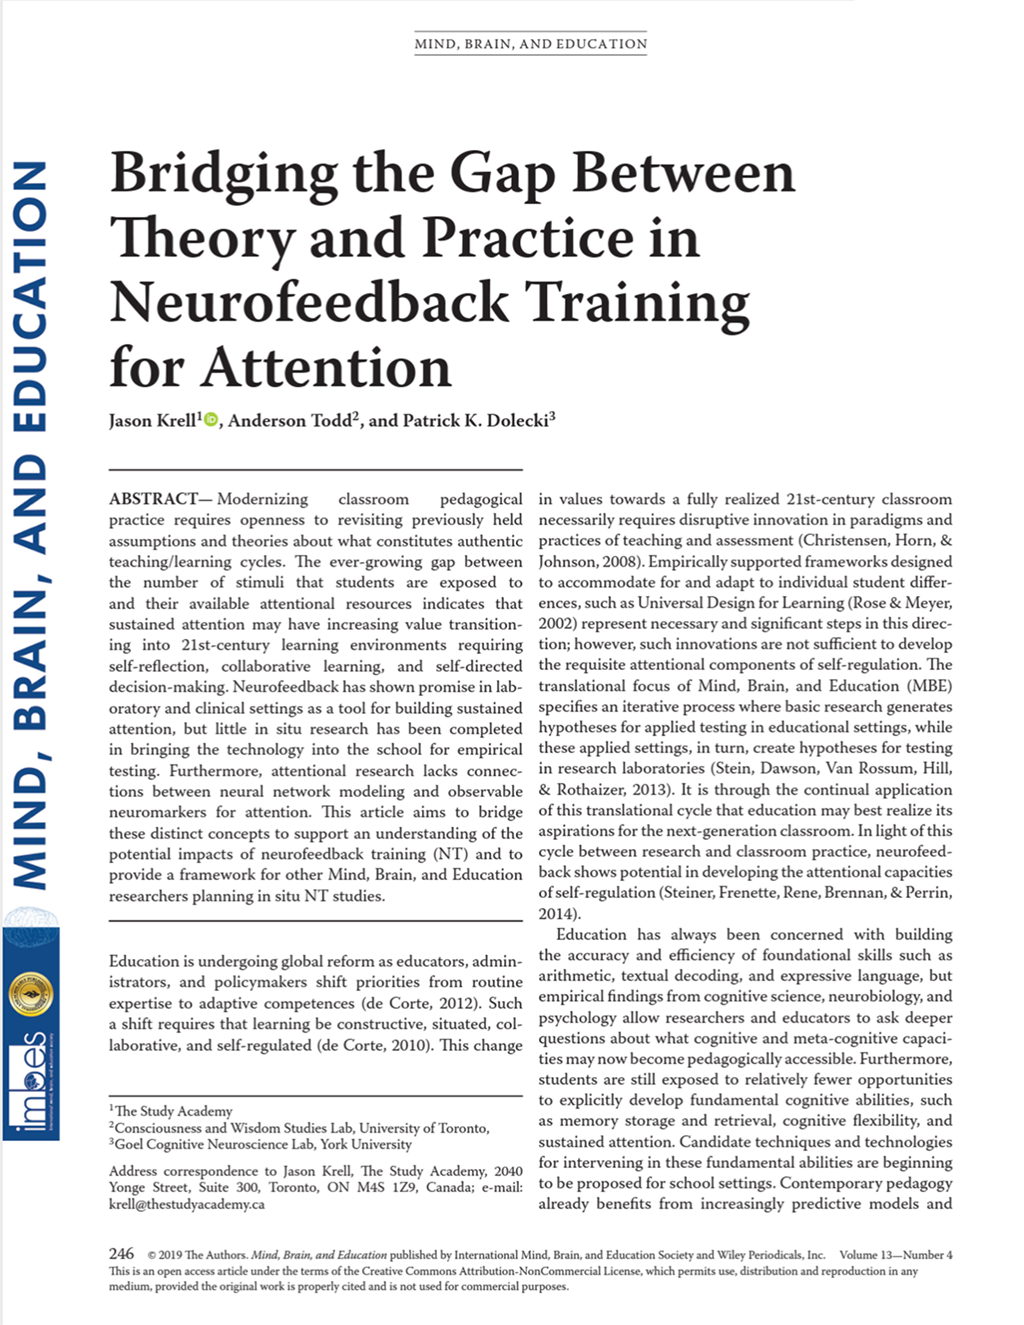 Cover page of 'Bridging the Gap Between Theory and Practice in Neurofeedback Training for Attention